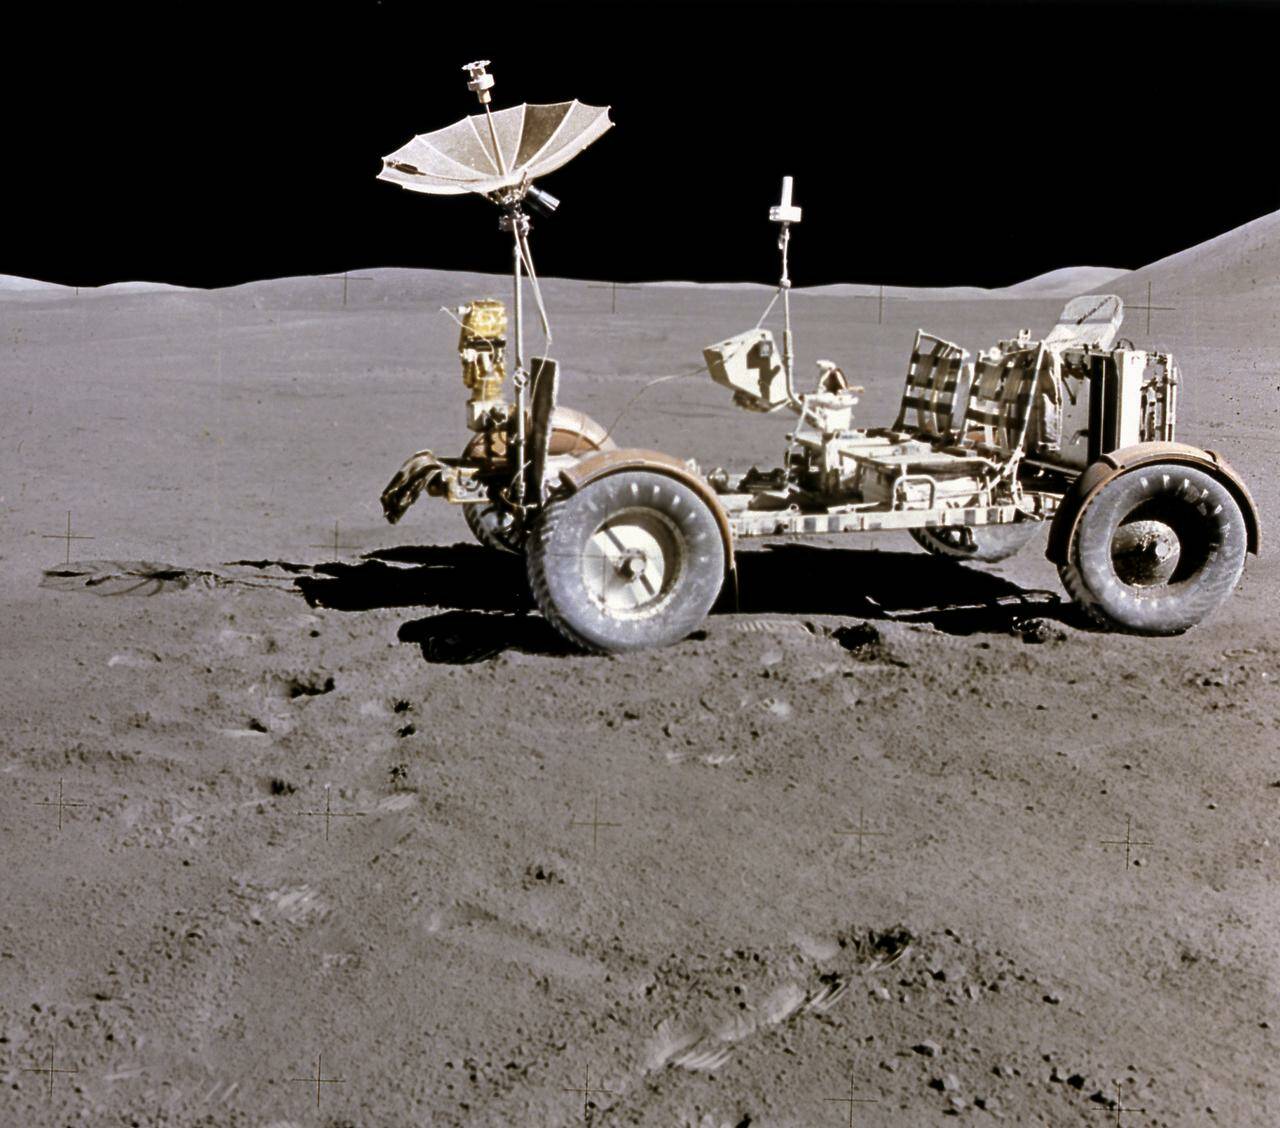 53 years since first battery-powered automotive drove at the Moon